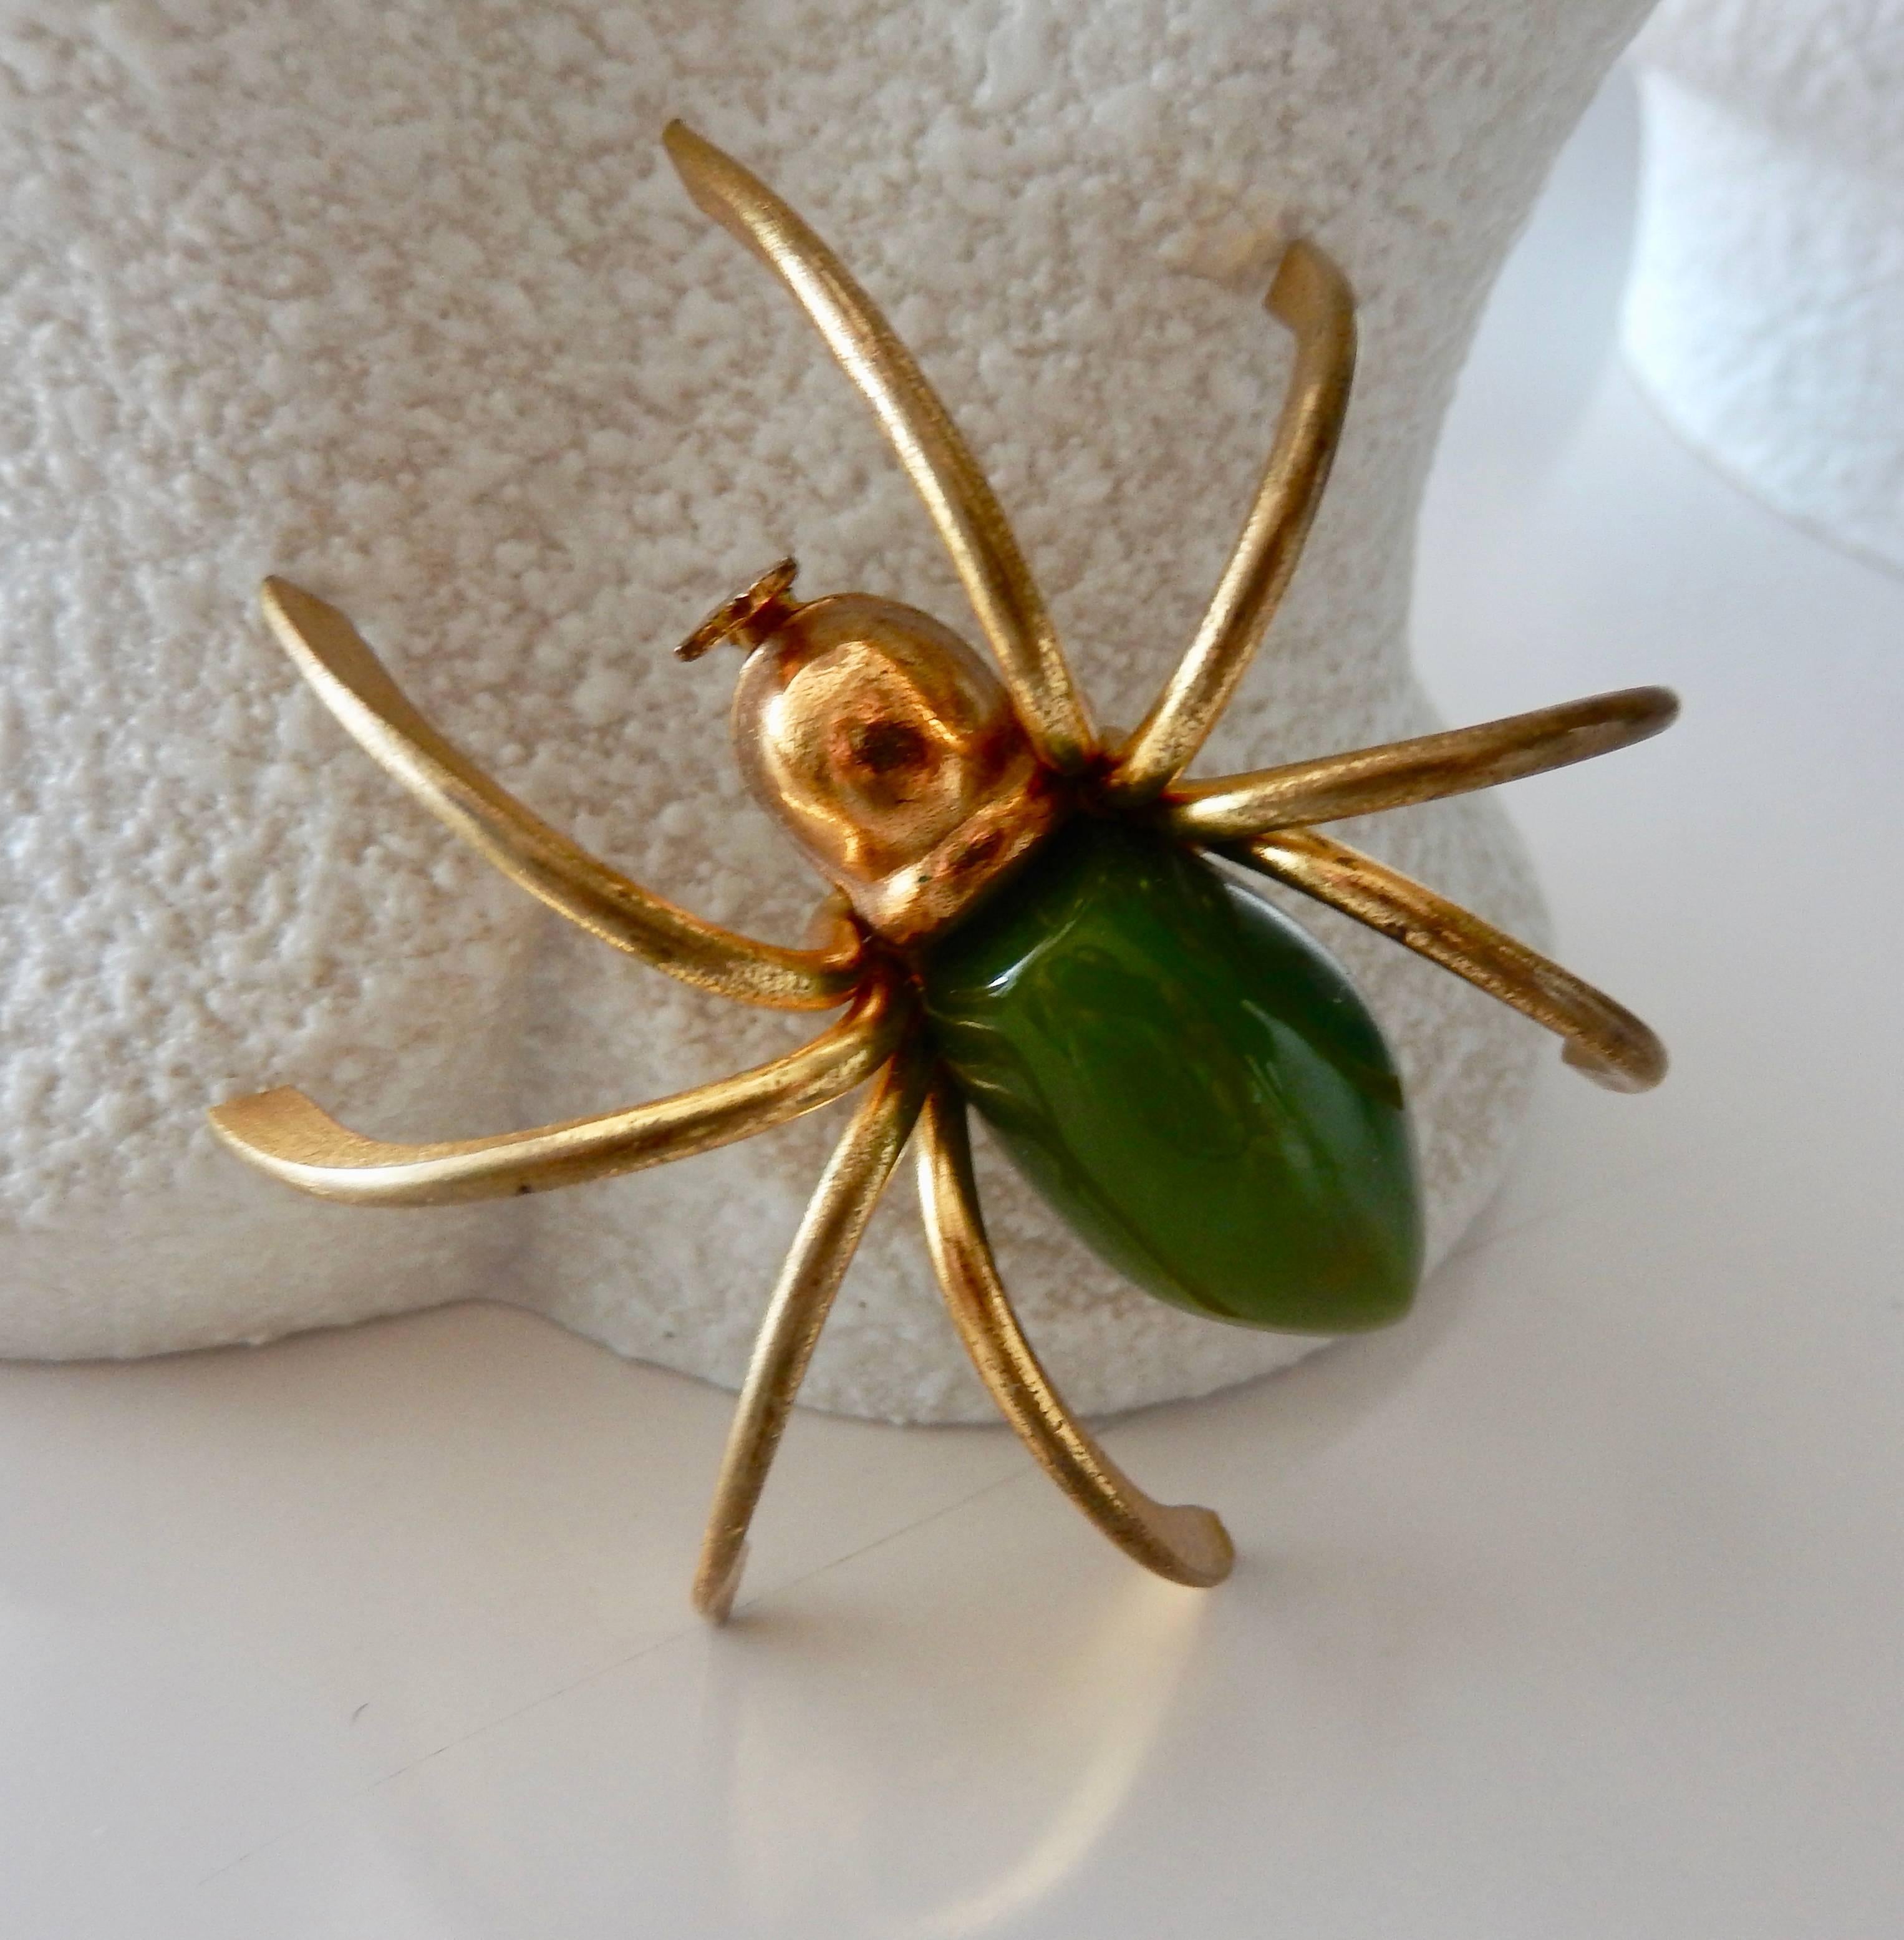 A whimsical three-dimensional gilt metal spider pin with a green bakelite body from the 1930s. In very good condition. A classic, scarce example of American Art Deco costume jewelry.  The only spider you would want to accompany you to a holiday